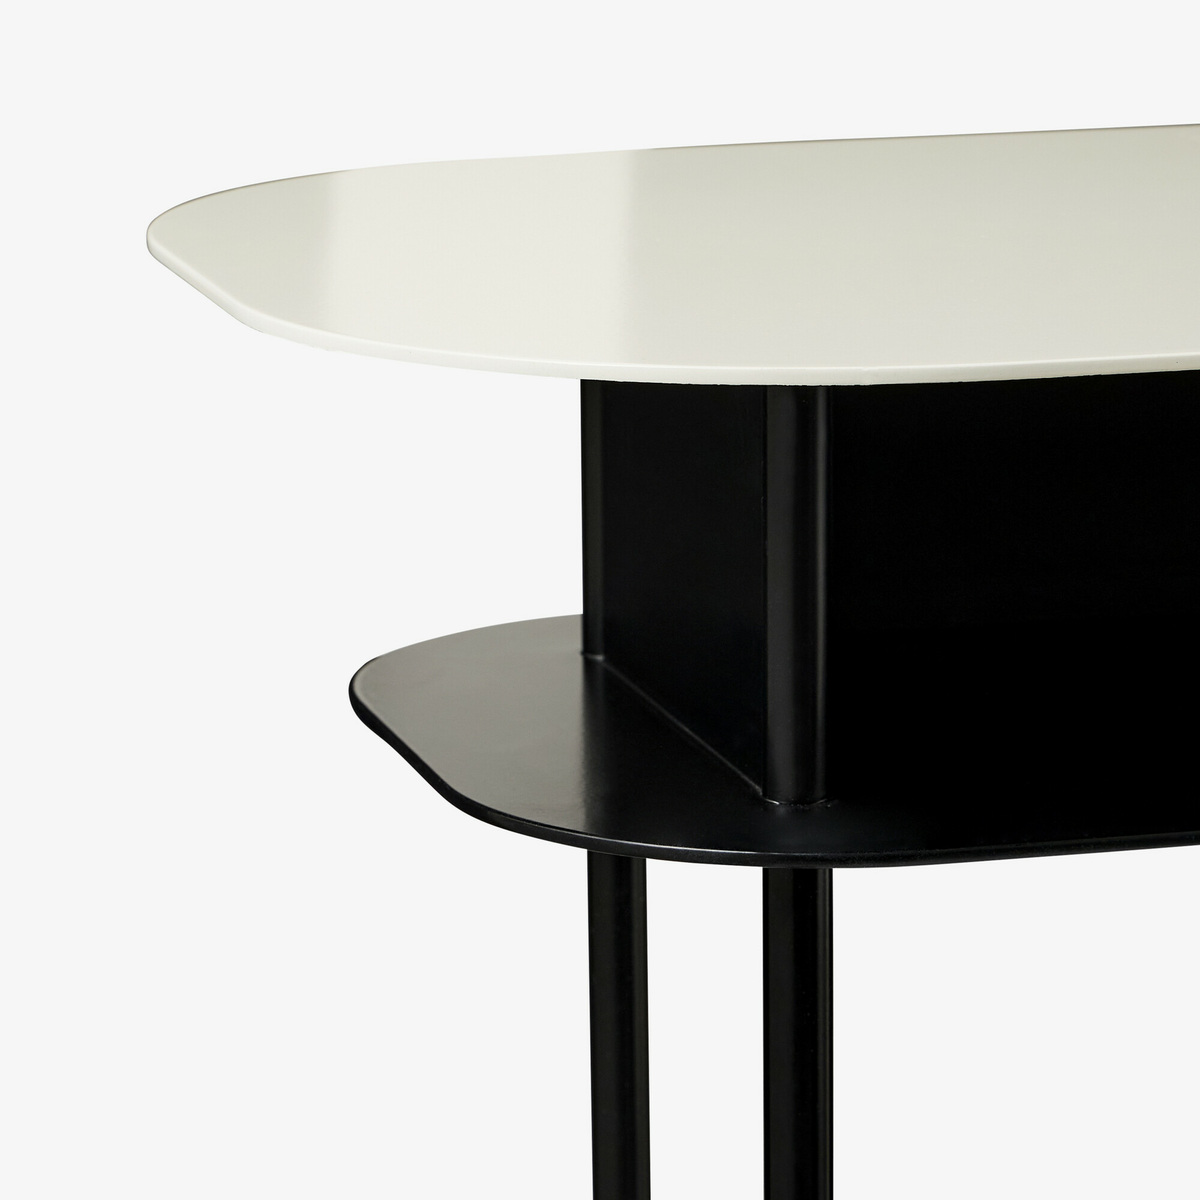 Console Table Tokyo, Off-White/Black - 110 x 40 x 85 cm - Powder coated steel - image 4